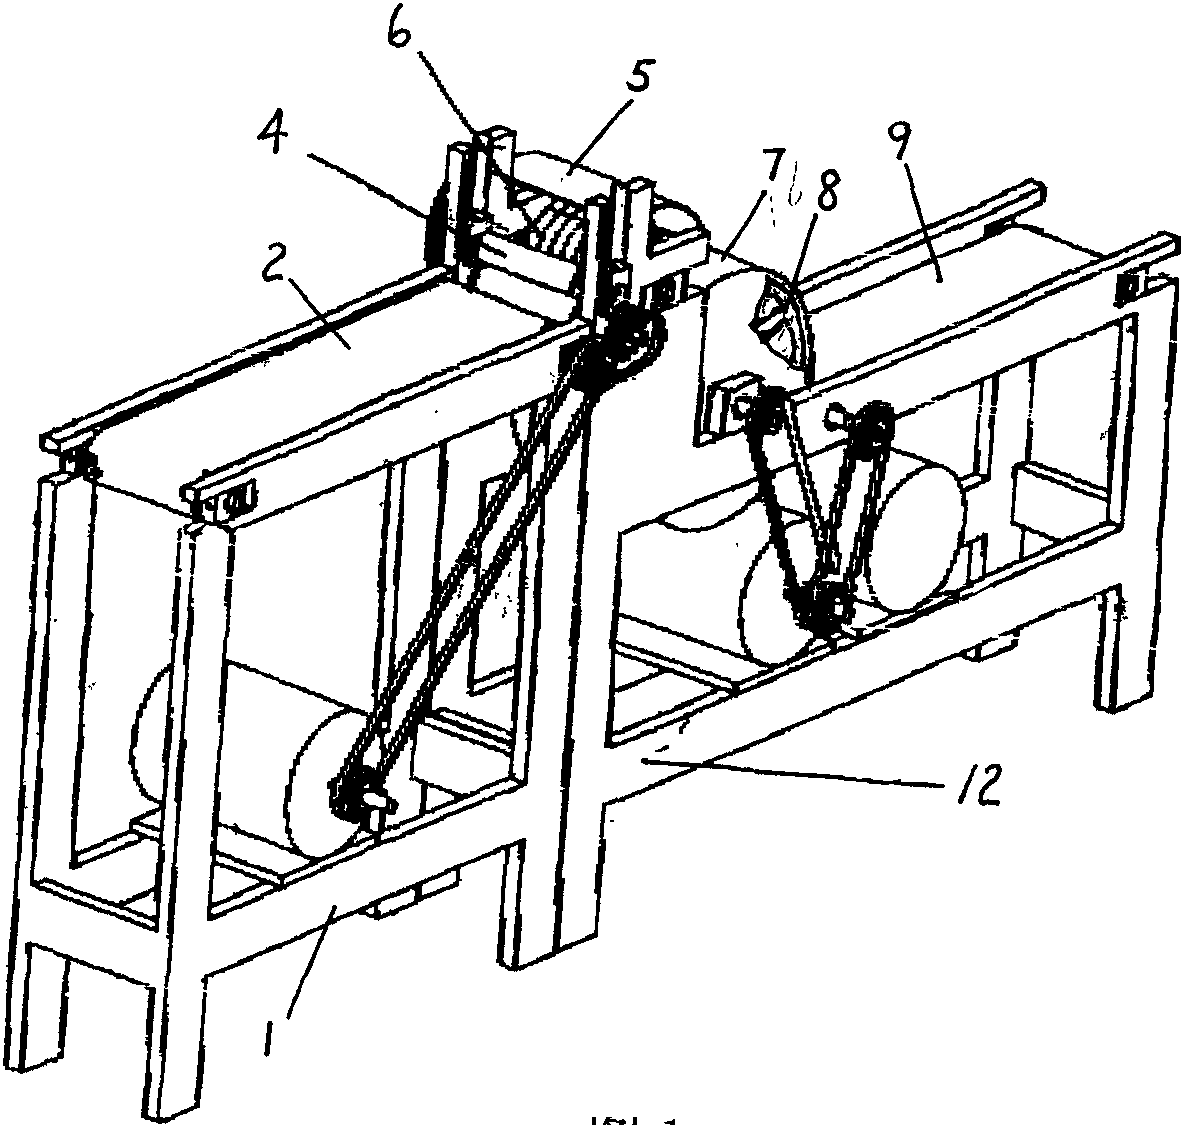 Method and equipment for extracting fiber from stalks